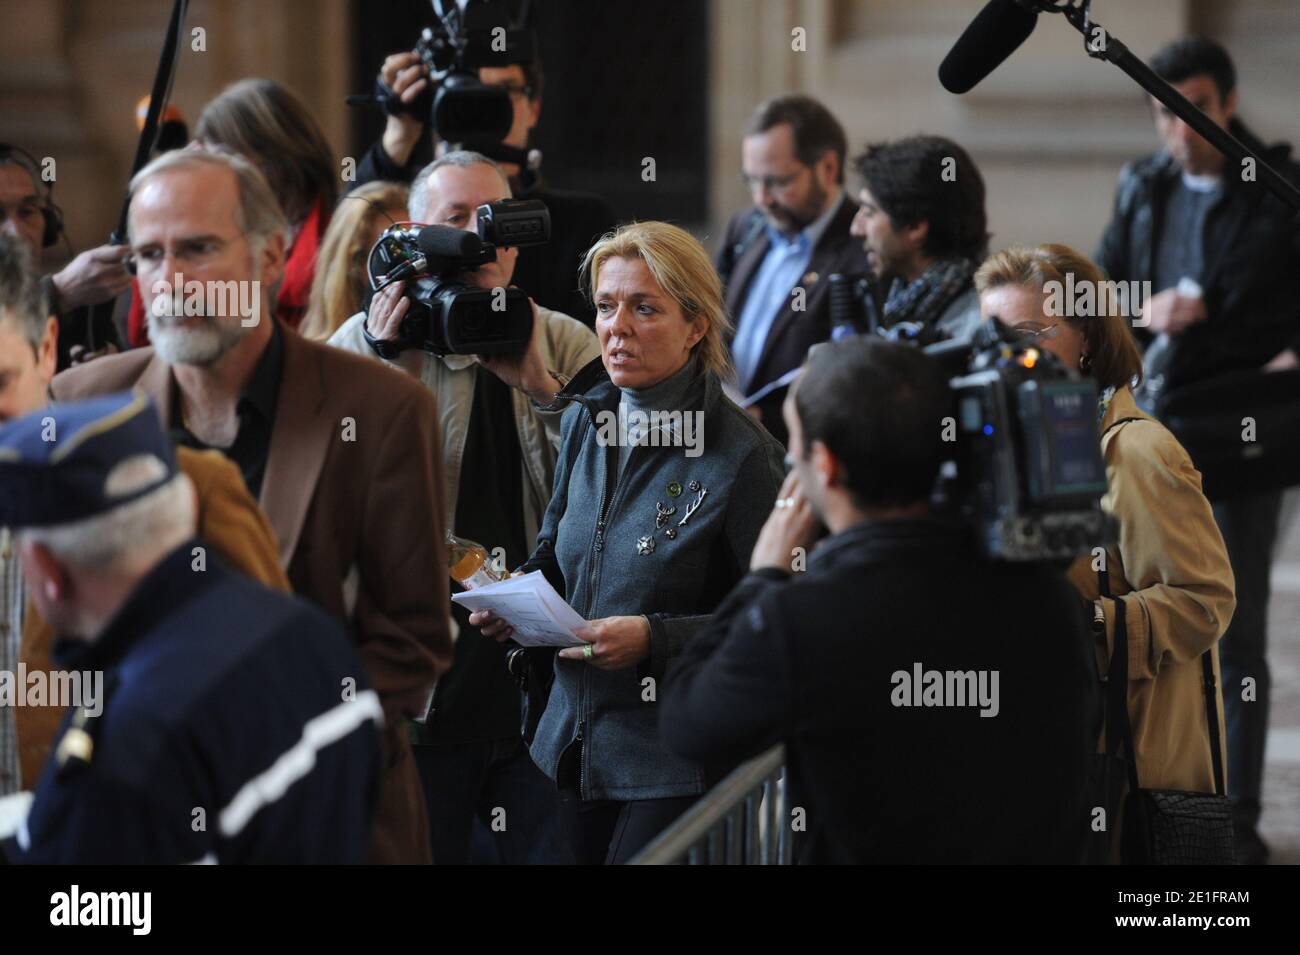 Diana Gunther arrives at the Palais de Justice to attend her father, German cardiologist Dieter Krombach's trial for the murder of Kalinka Bamberski, in Paris, France on March 29, 2011. The German doctor is accused of having raped and killed his then 14-year-old stepdaughter, Kalinka Bamberski, in the summer of 1982 while she was holidaying with her mother at Krombach's home at Lake Constance, southern Germany. A court in Germany ruled that Krombach could not be held responsible for the death, but in 1995 a court in Paris found the doctor guilty of manslaughter and sentenced him in absentia to Stock Photo